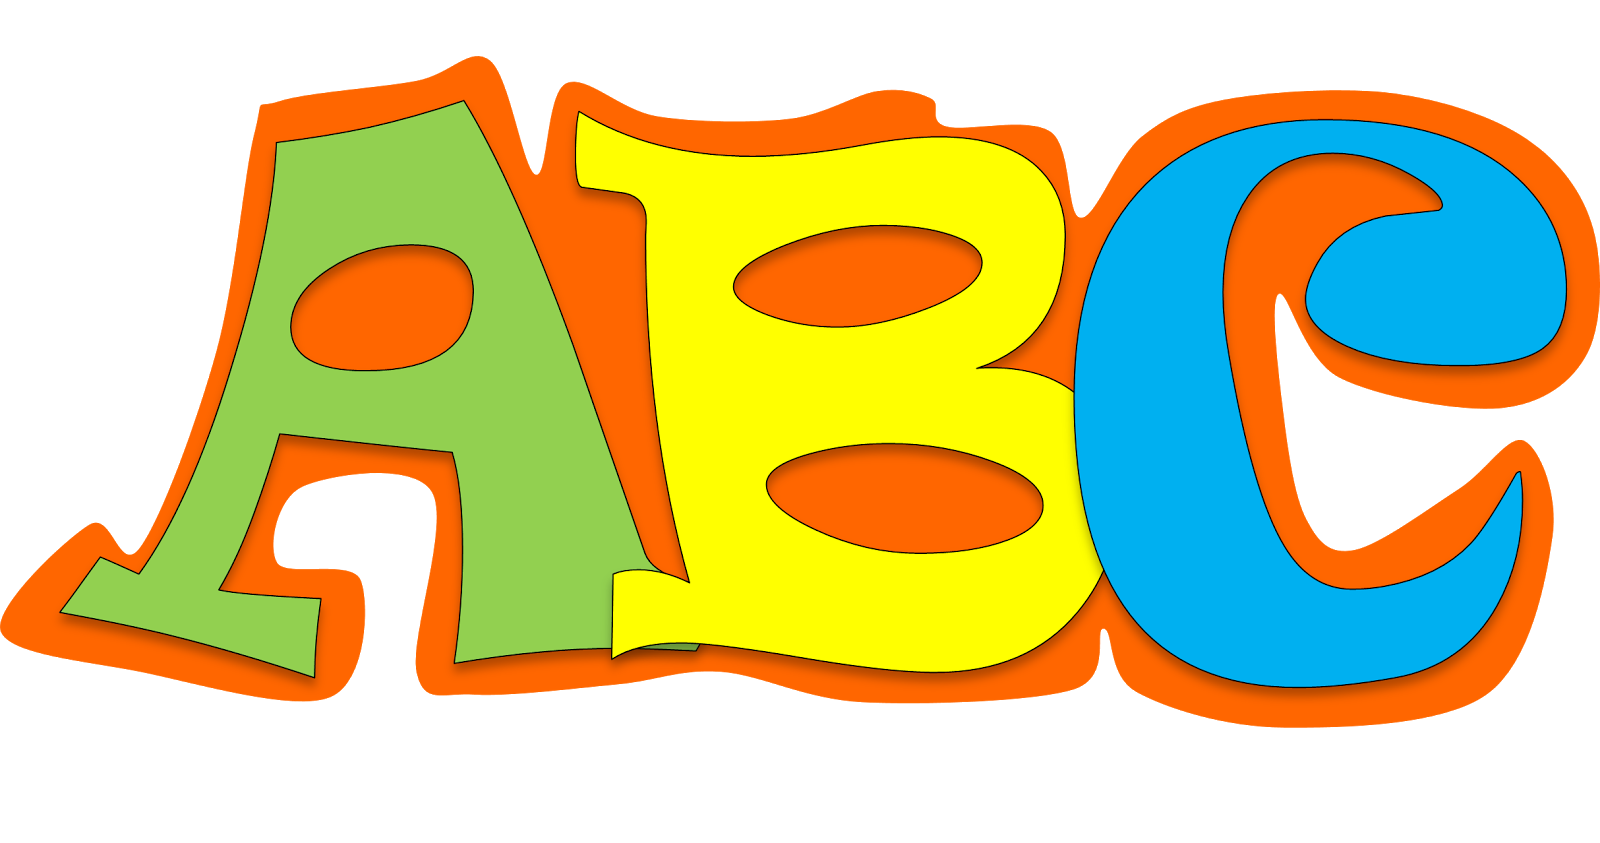 free-cliparts-banner-abc-s-download-free-cliparts-banner-abc-s-png